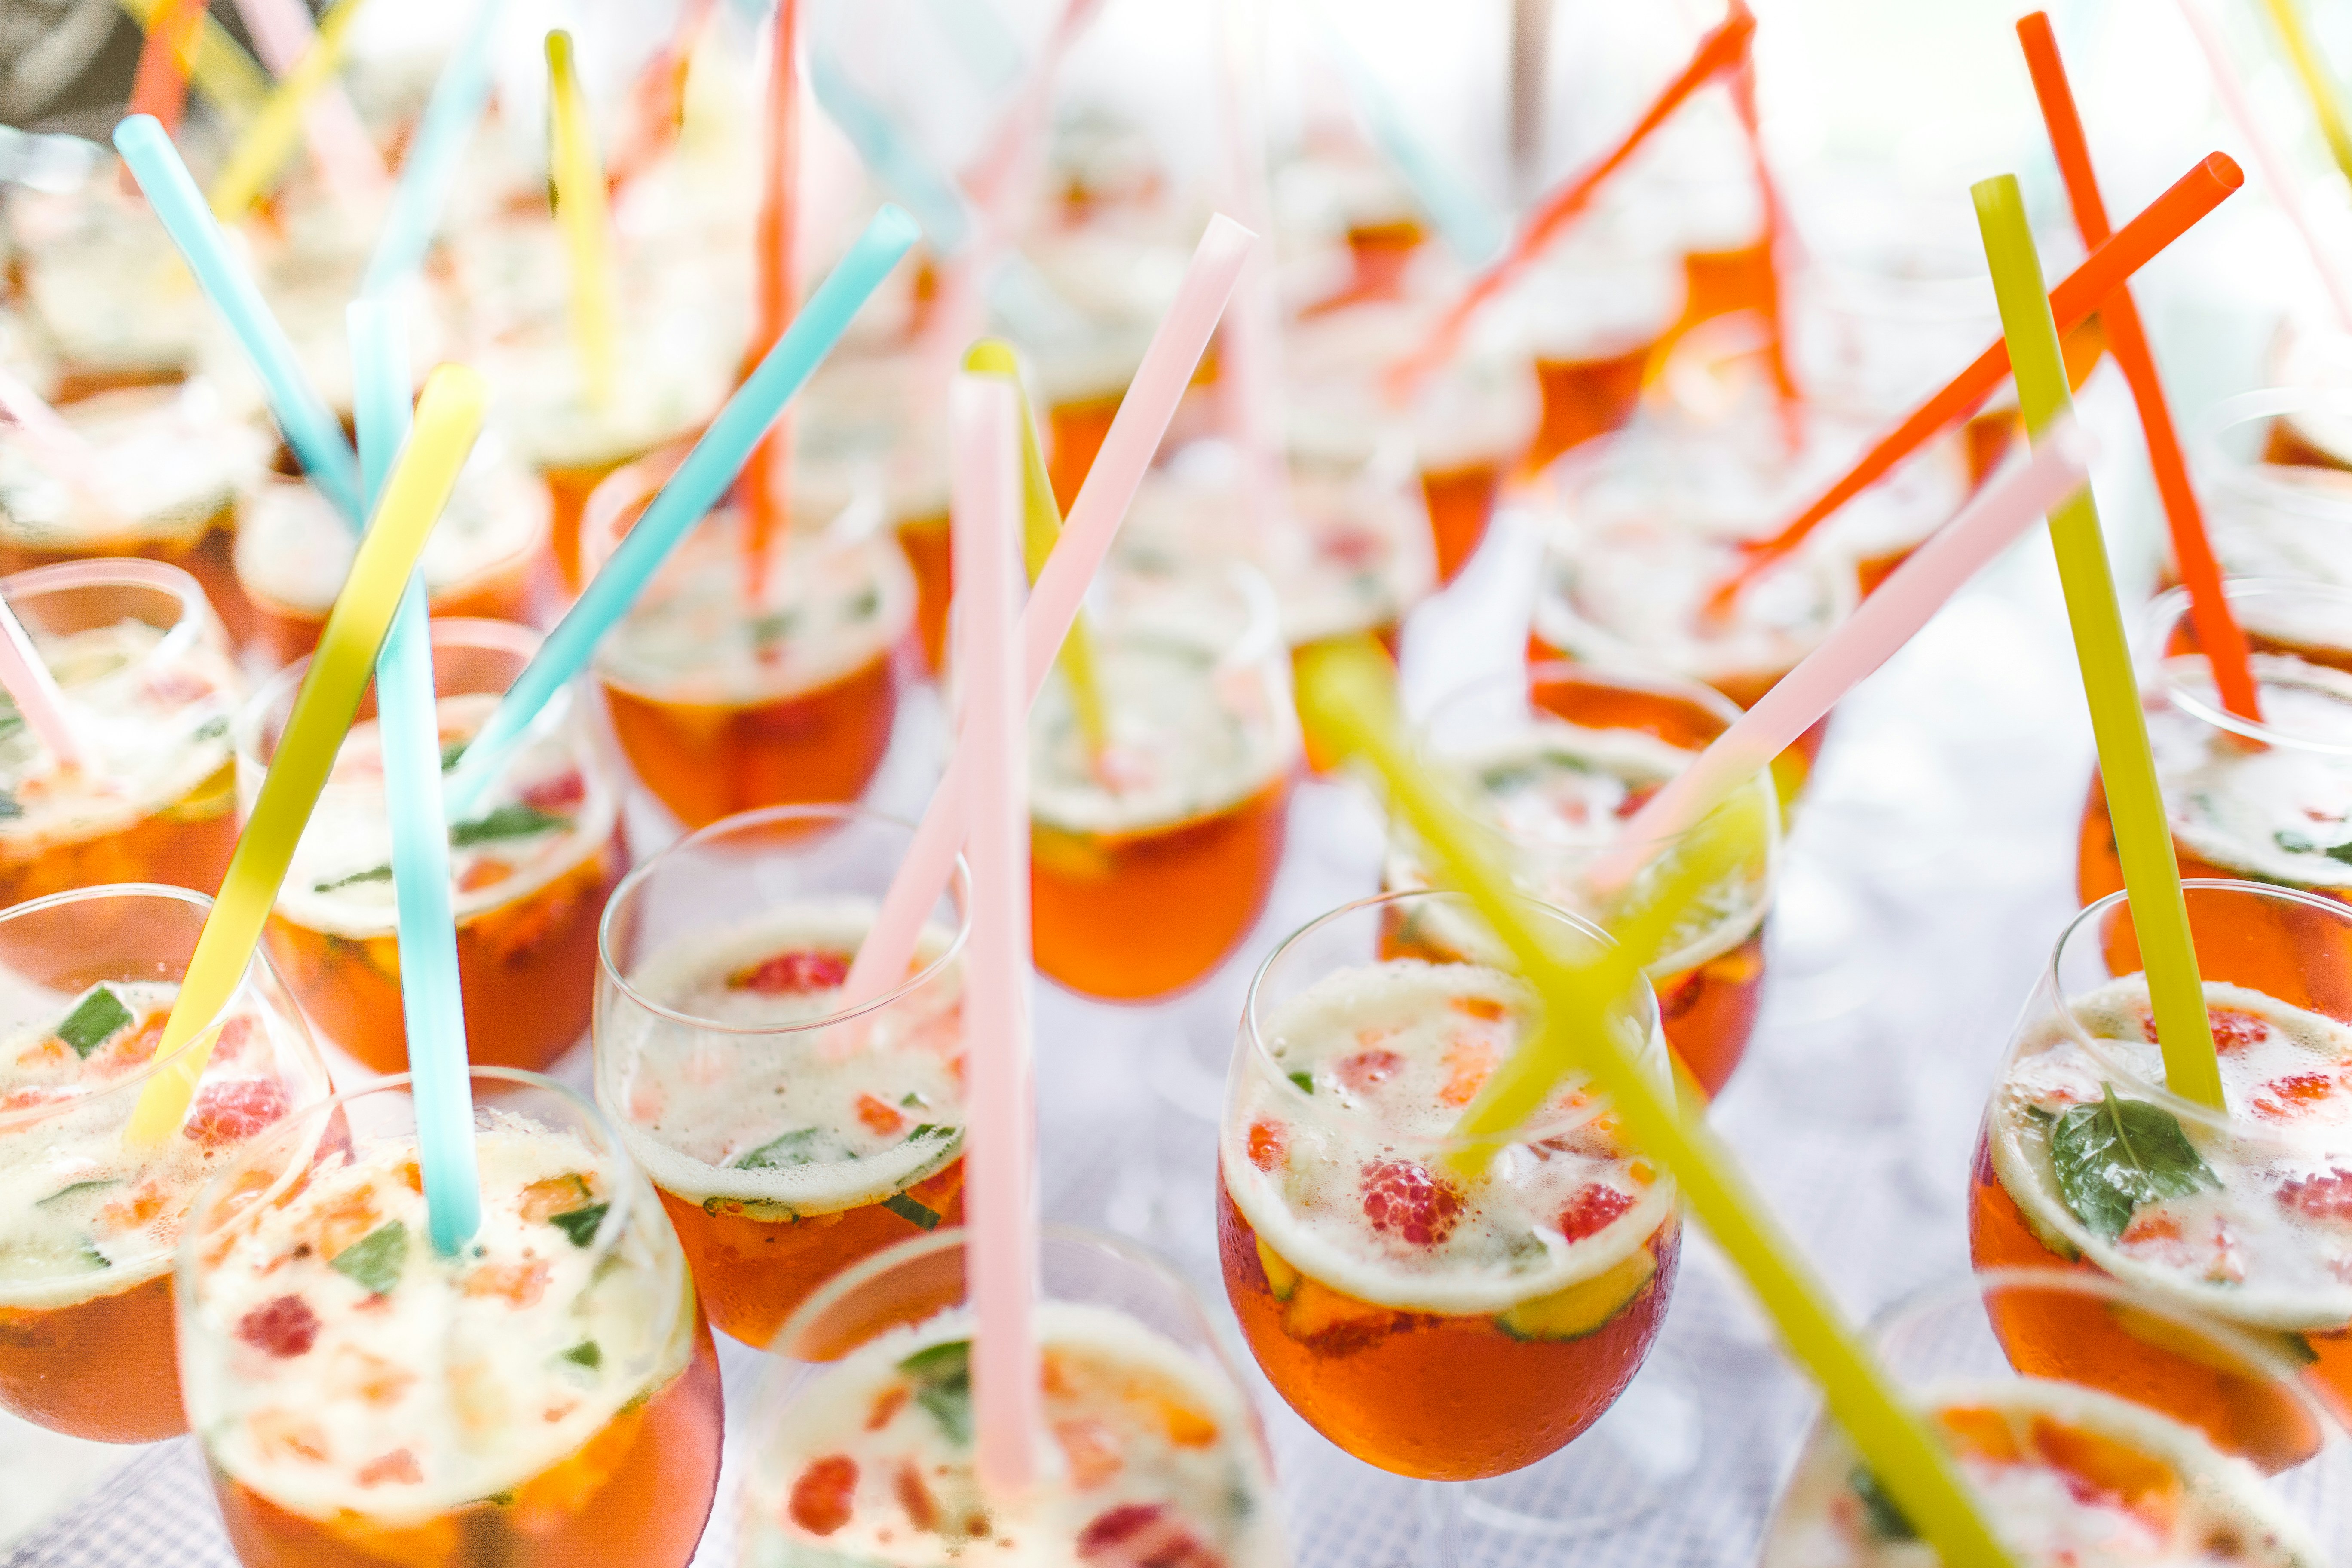 Pimms drinks with Summer Vibes